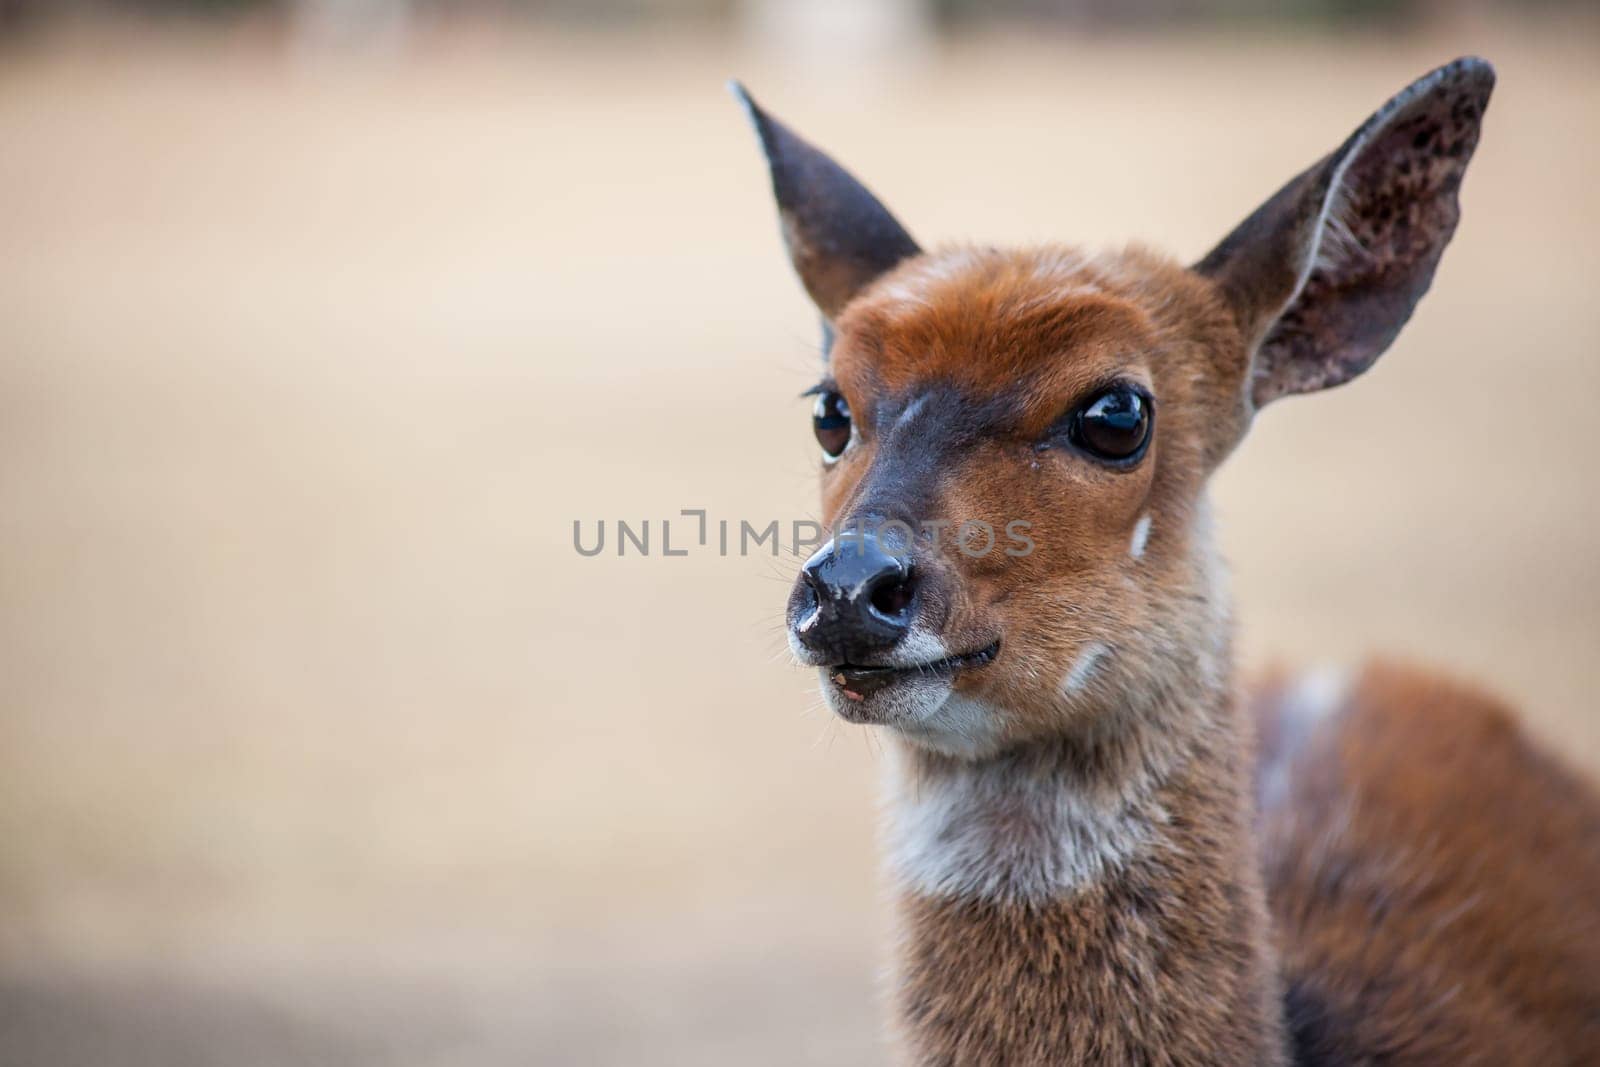 Close-up image of a young female Bushbuck (Tragelaphus scriptus) in the Royal Natal National Park, Kwa-Zulu Natal Privince South Africa